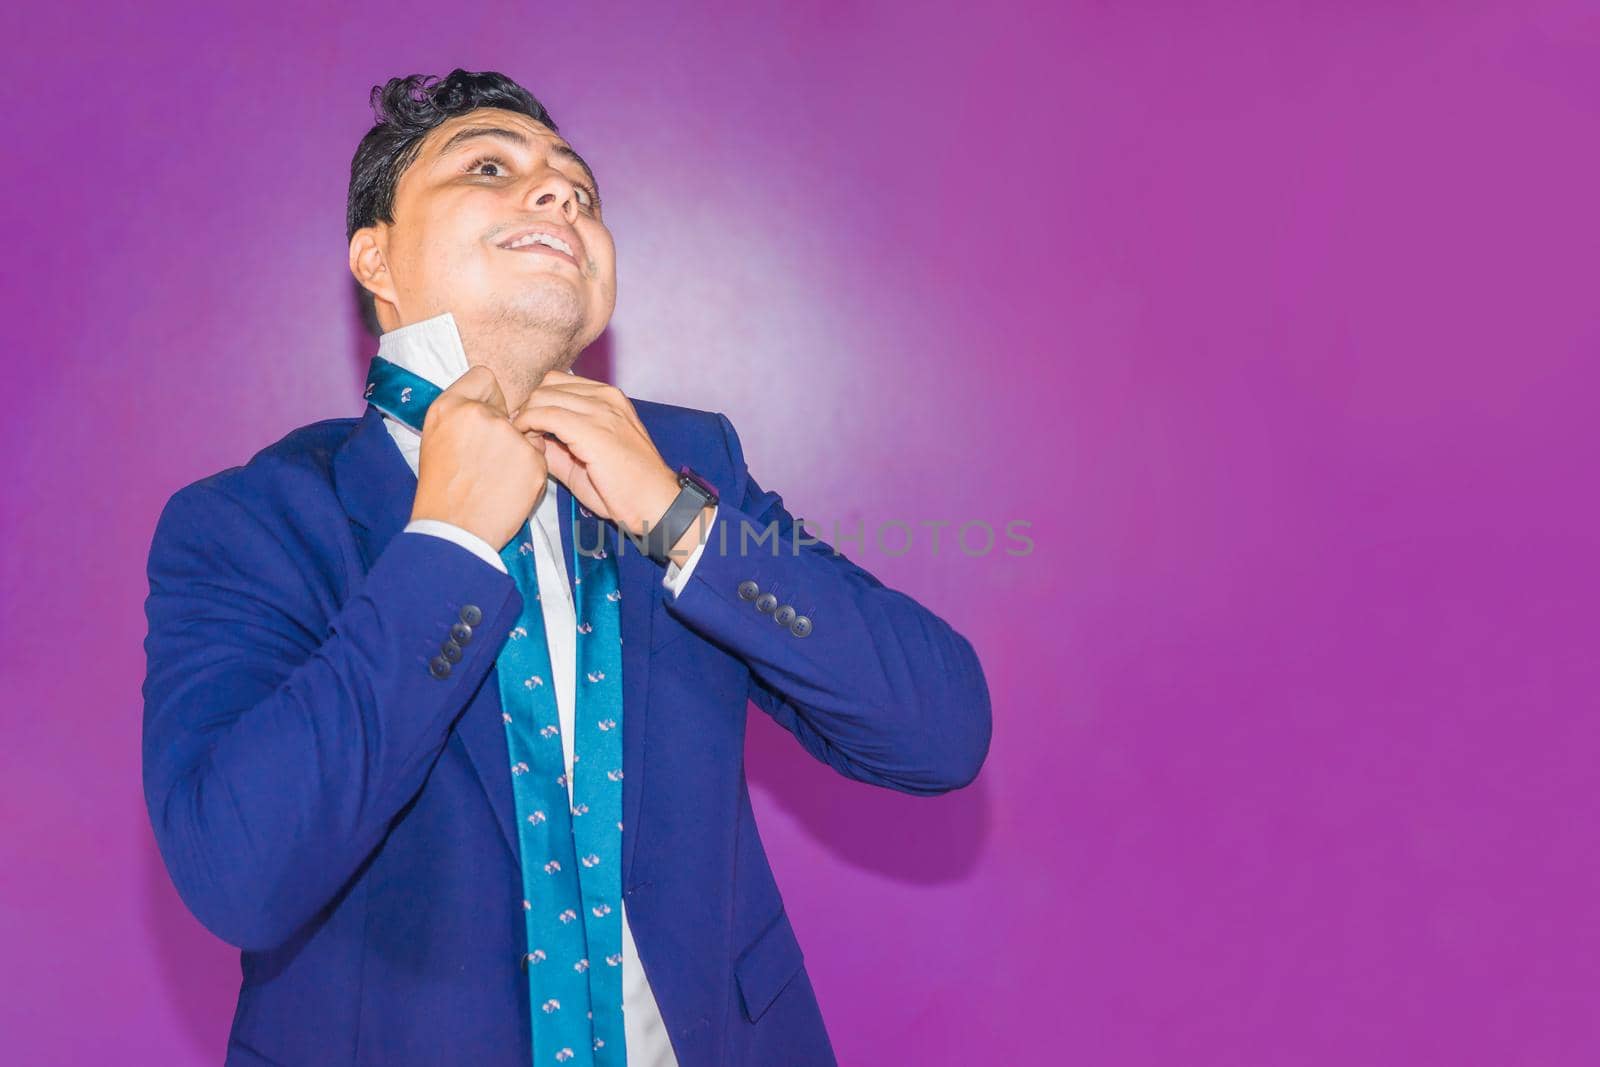 Latin Nicaraguan man in a blue suit having trouble tying his tie knot on a flat purple background